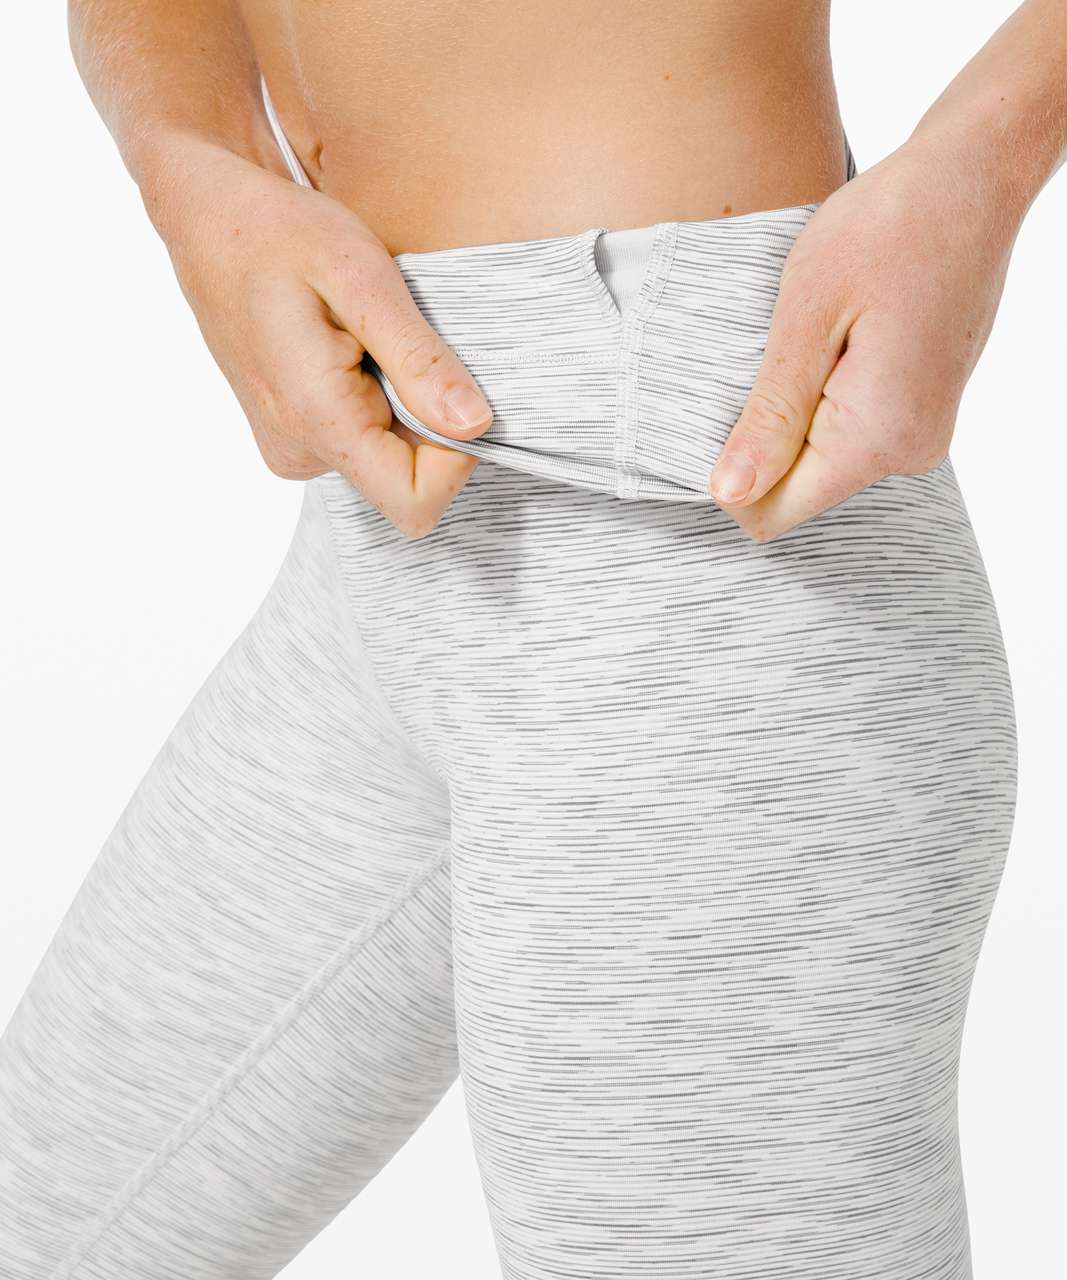 Lululemon Wunder Under Super High-Rise Tight *Luxtreme 28" - Wee Are From Space Nimbus Battleship